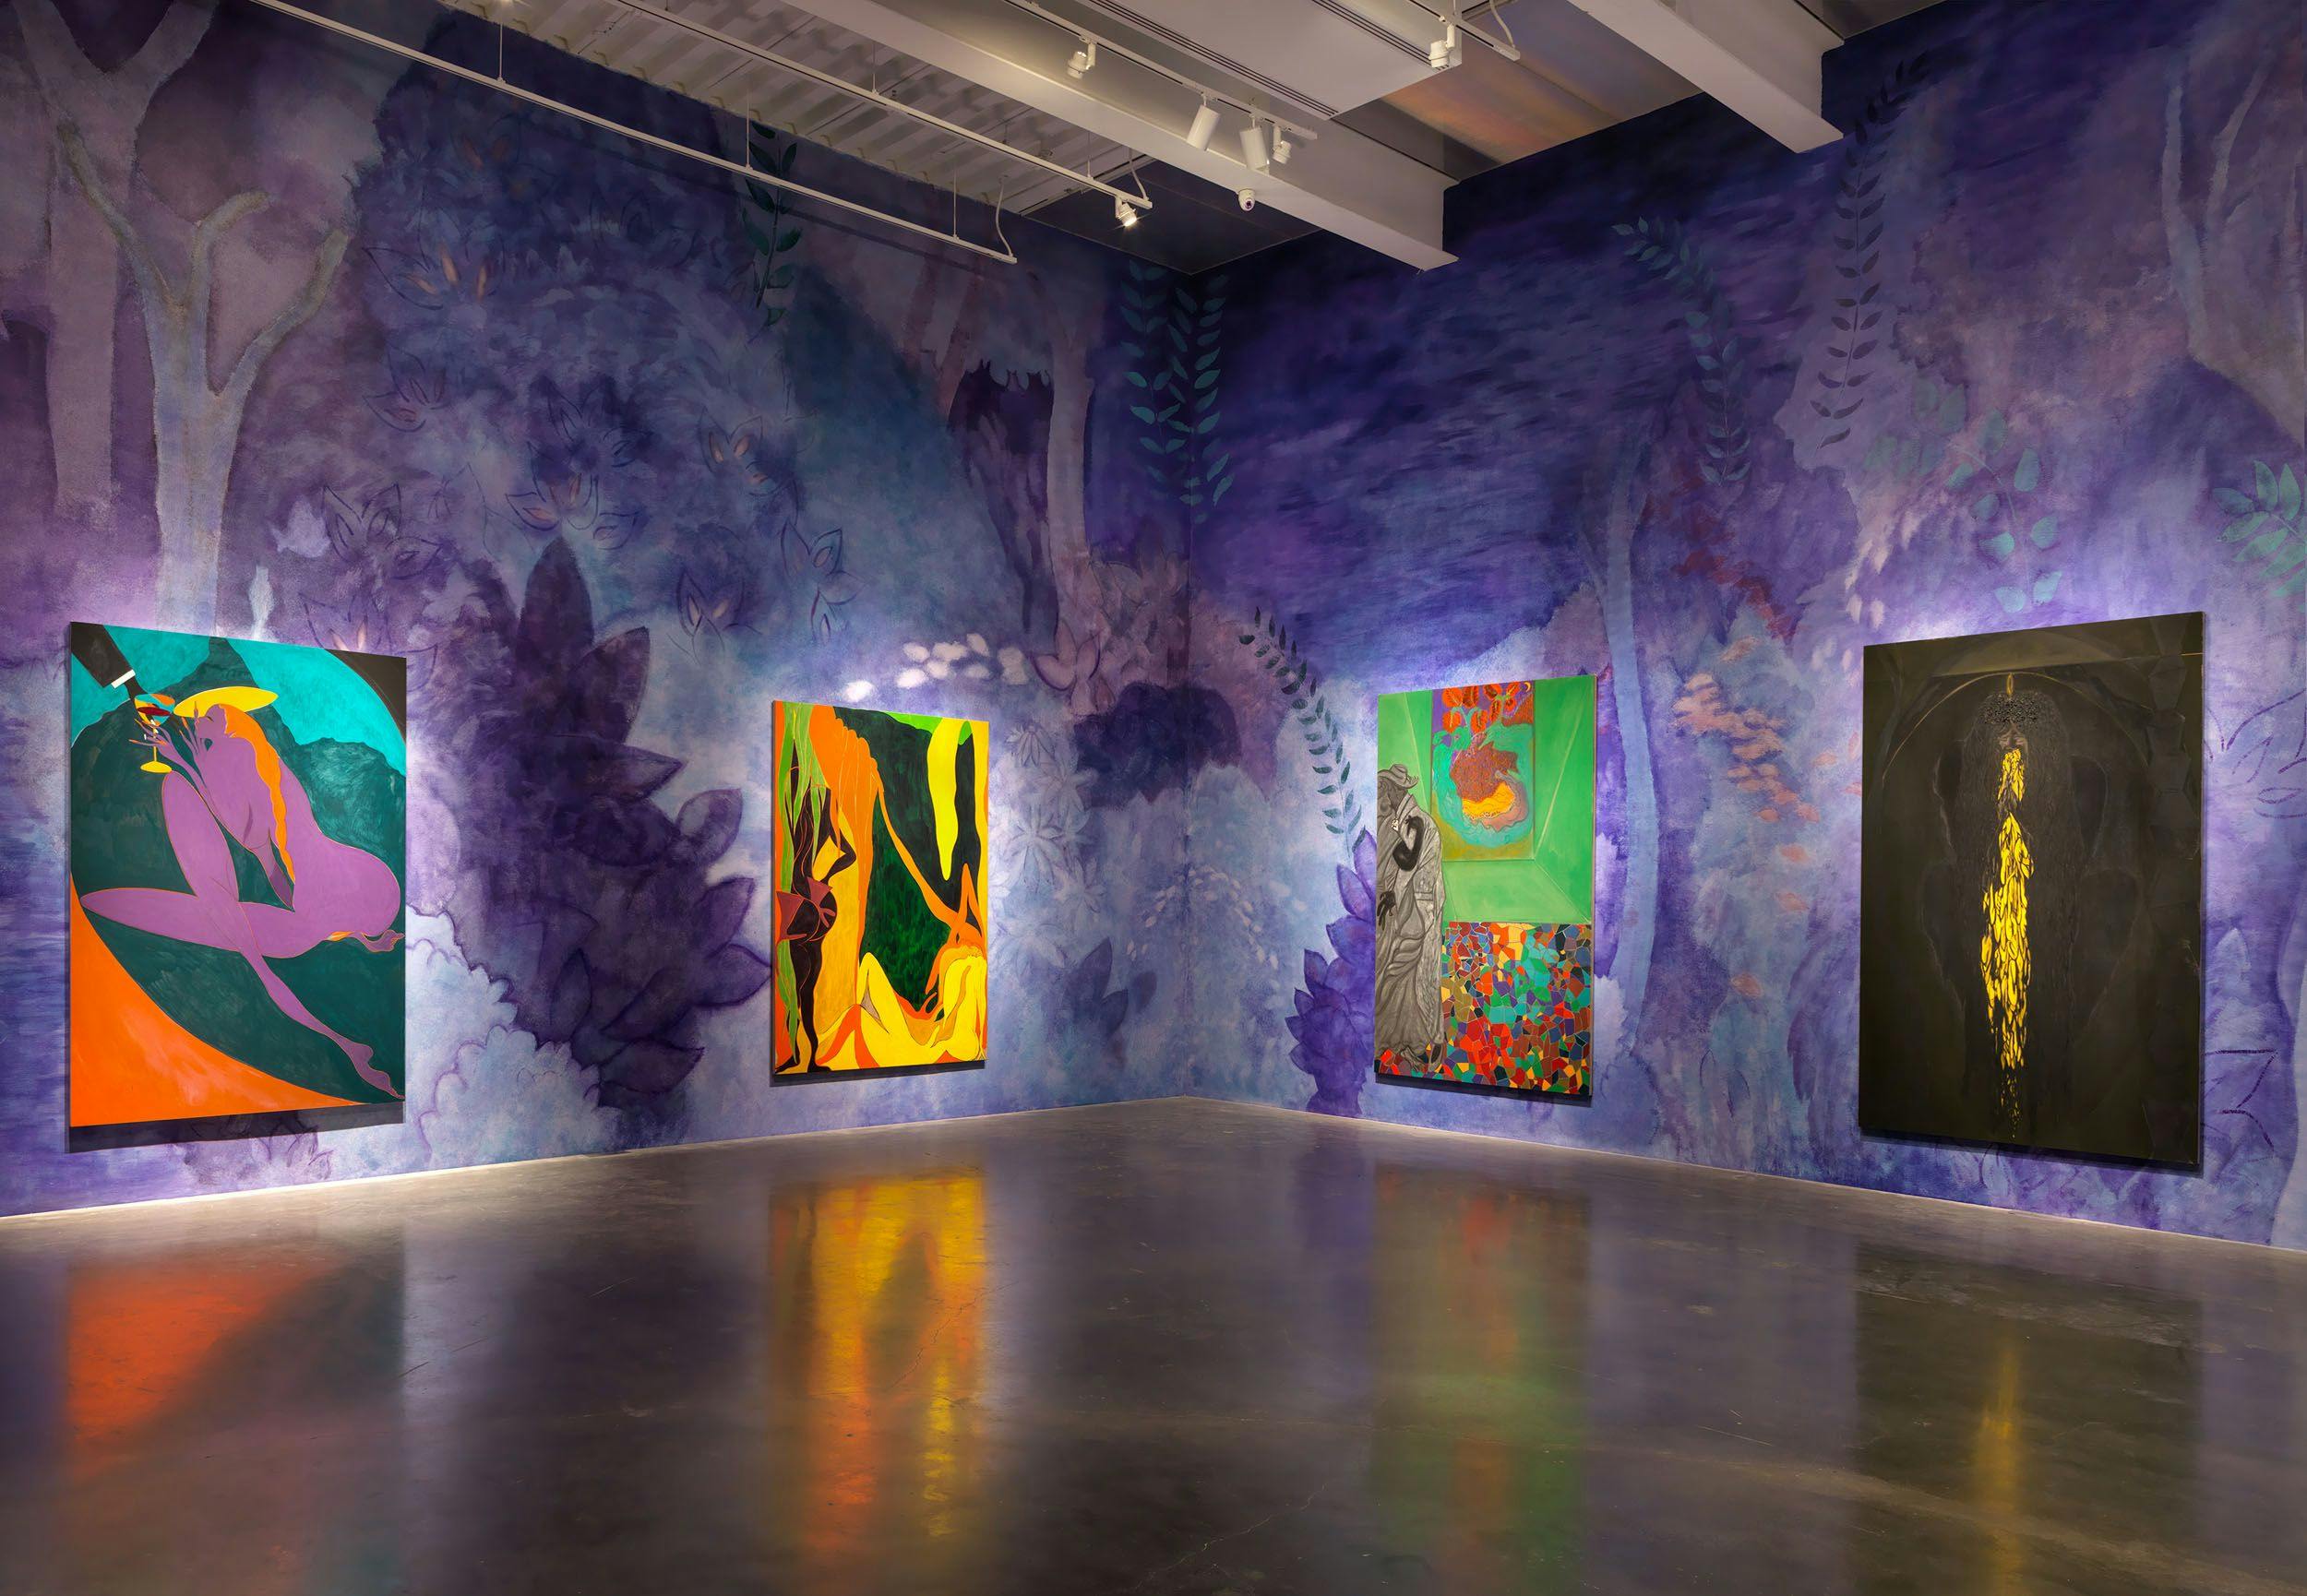 Installation view of the exhibition, Chris Ofili: Night and Day, at the New Museum in New York, dated 2014.